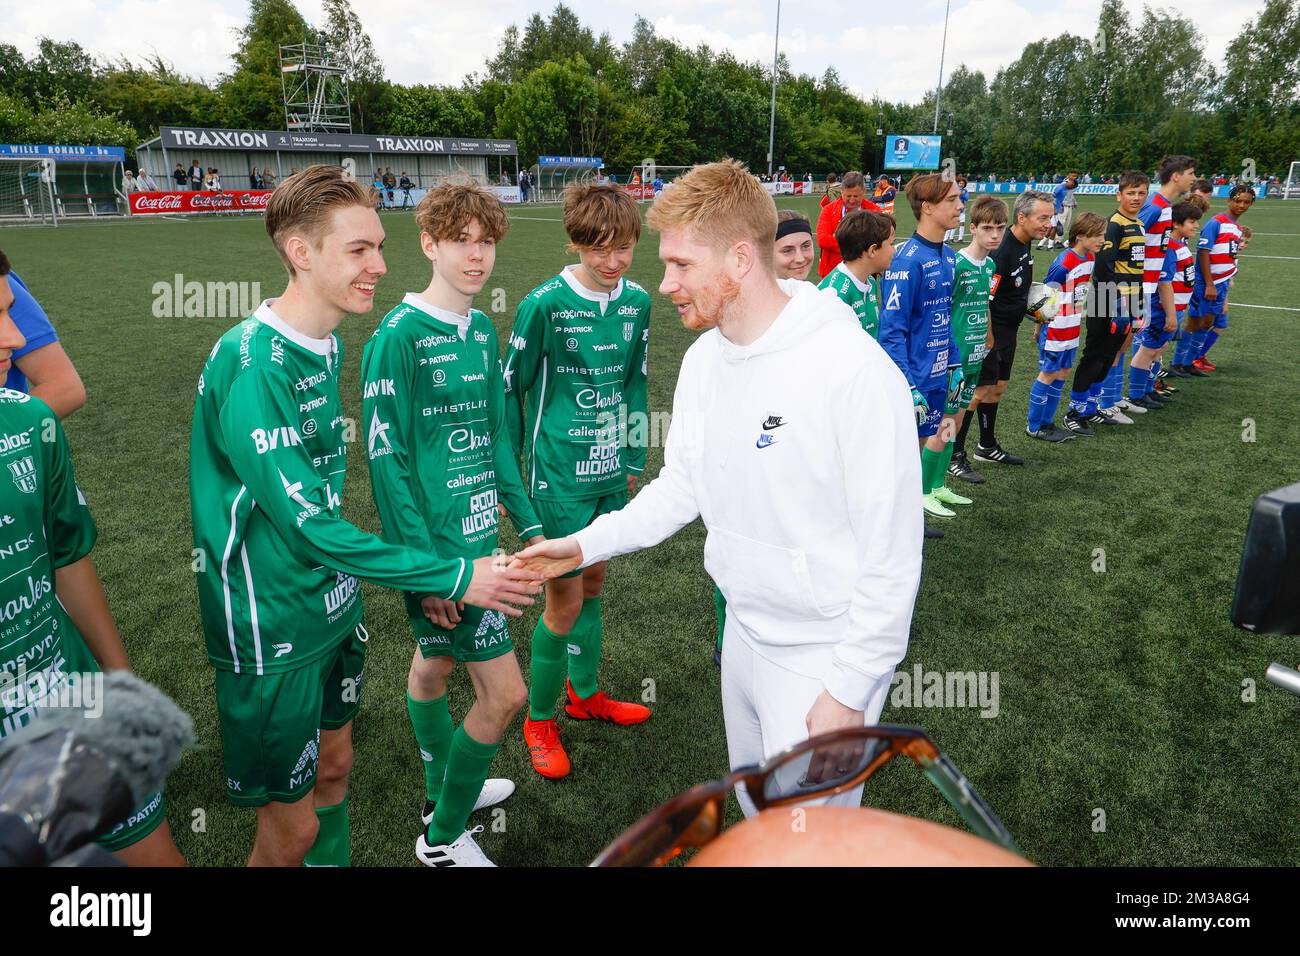 Belgium's Kevin De Bruyne greets players of the G-voetbal Kortrijk team during the 'Kevin de Bruyne Cup' youth soccer tournament for U15 teams, Saturday 28 May 2022 in Drongen, Gent. BELGA PHOTO BRUNO FAHY Stock Photo